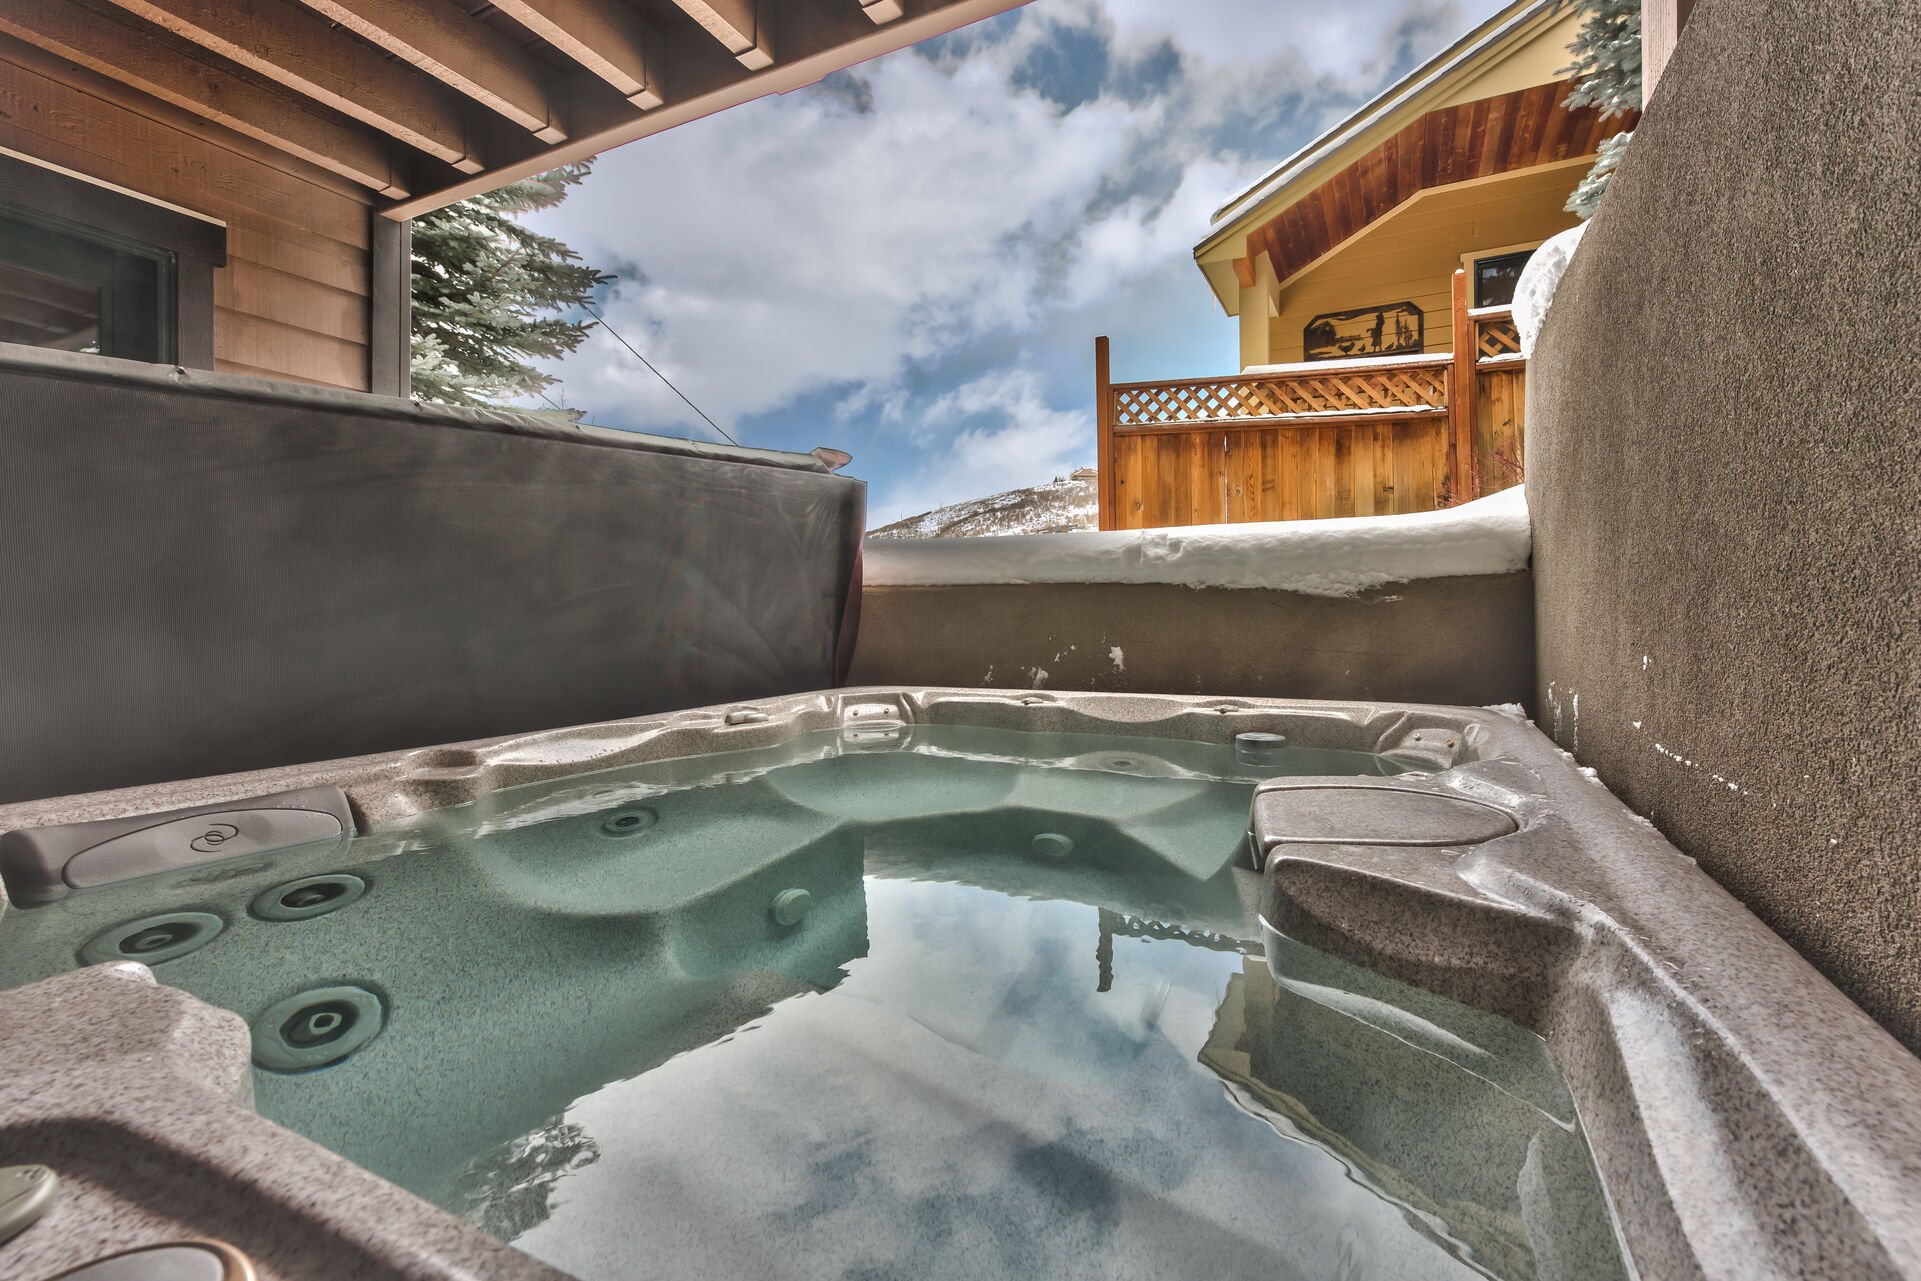 8-Seat Hot Tub Located on Back Patio - Level 1